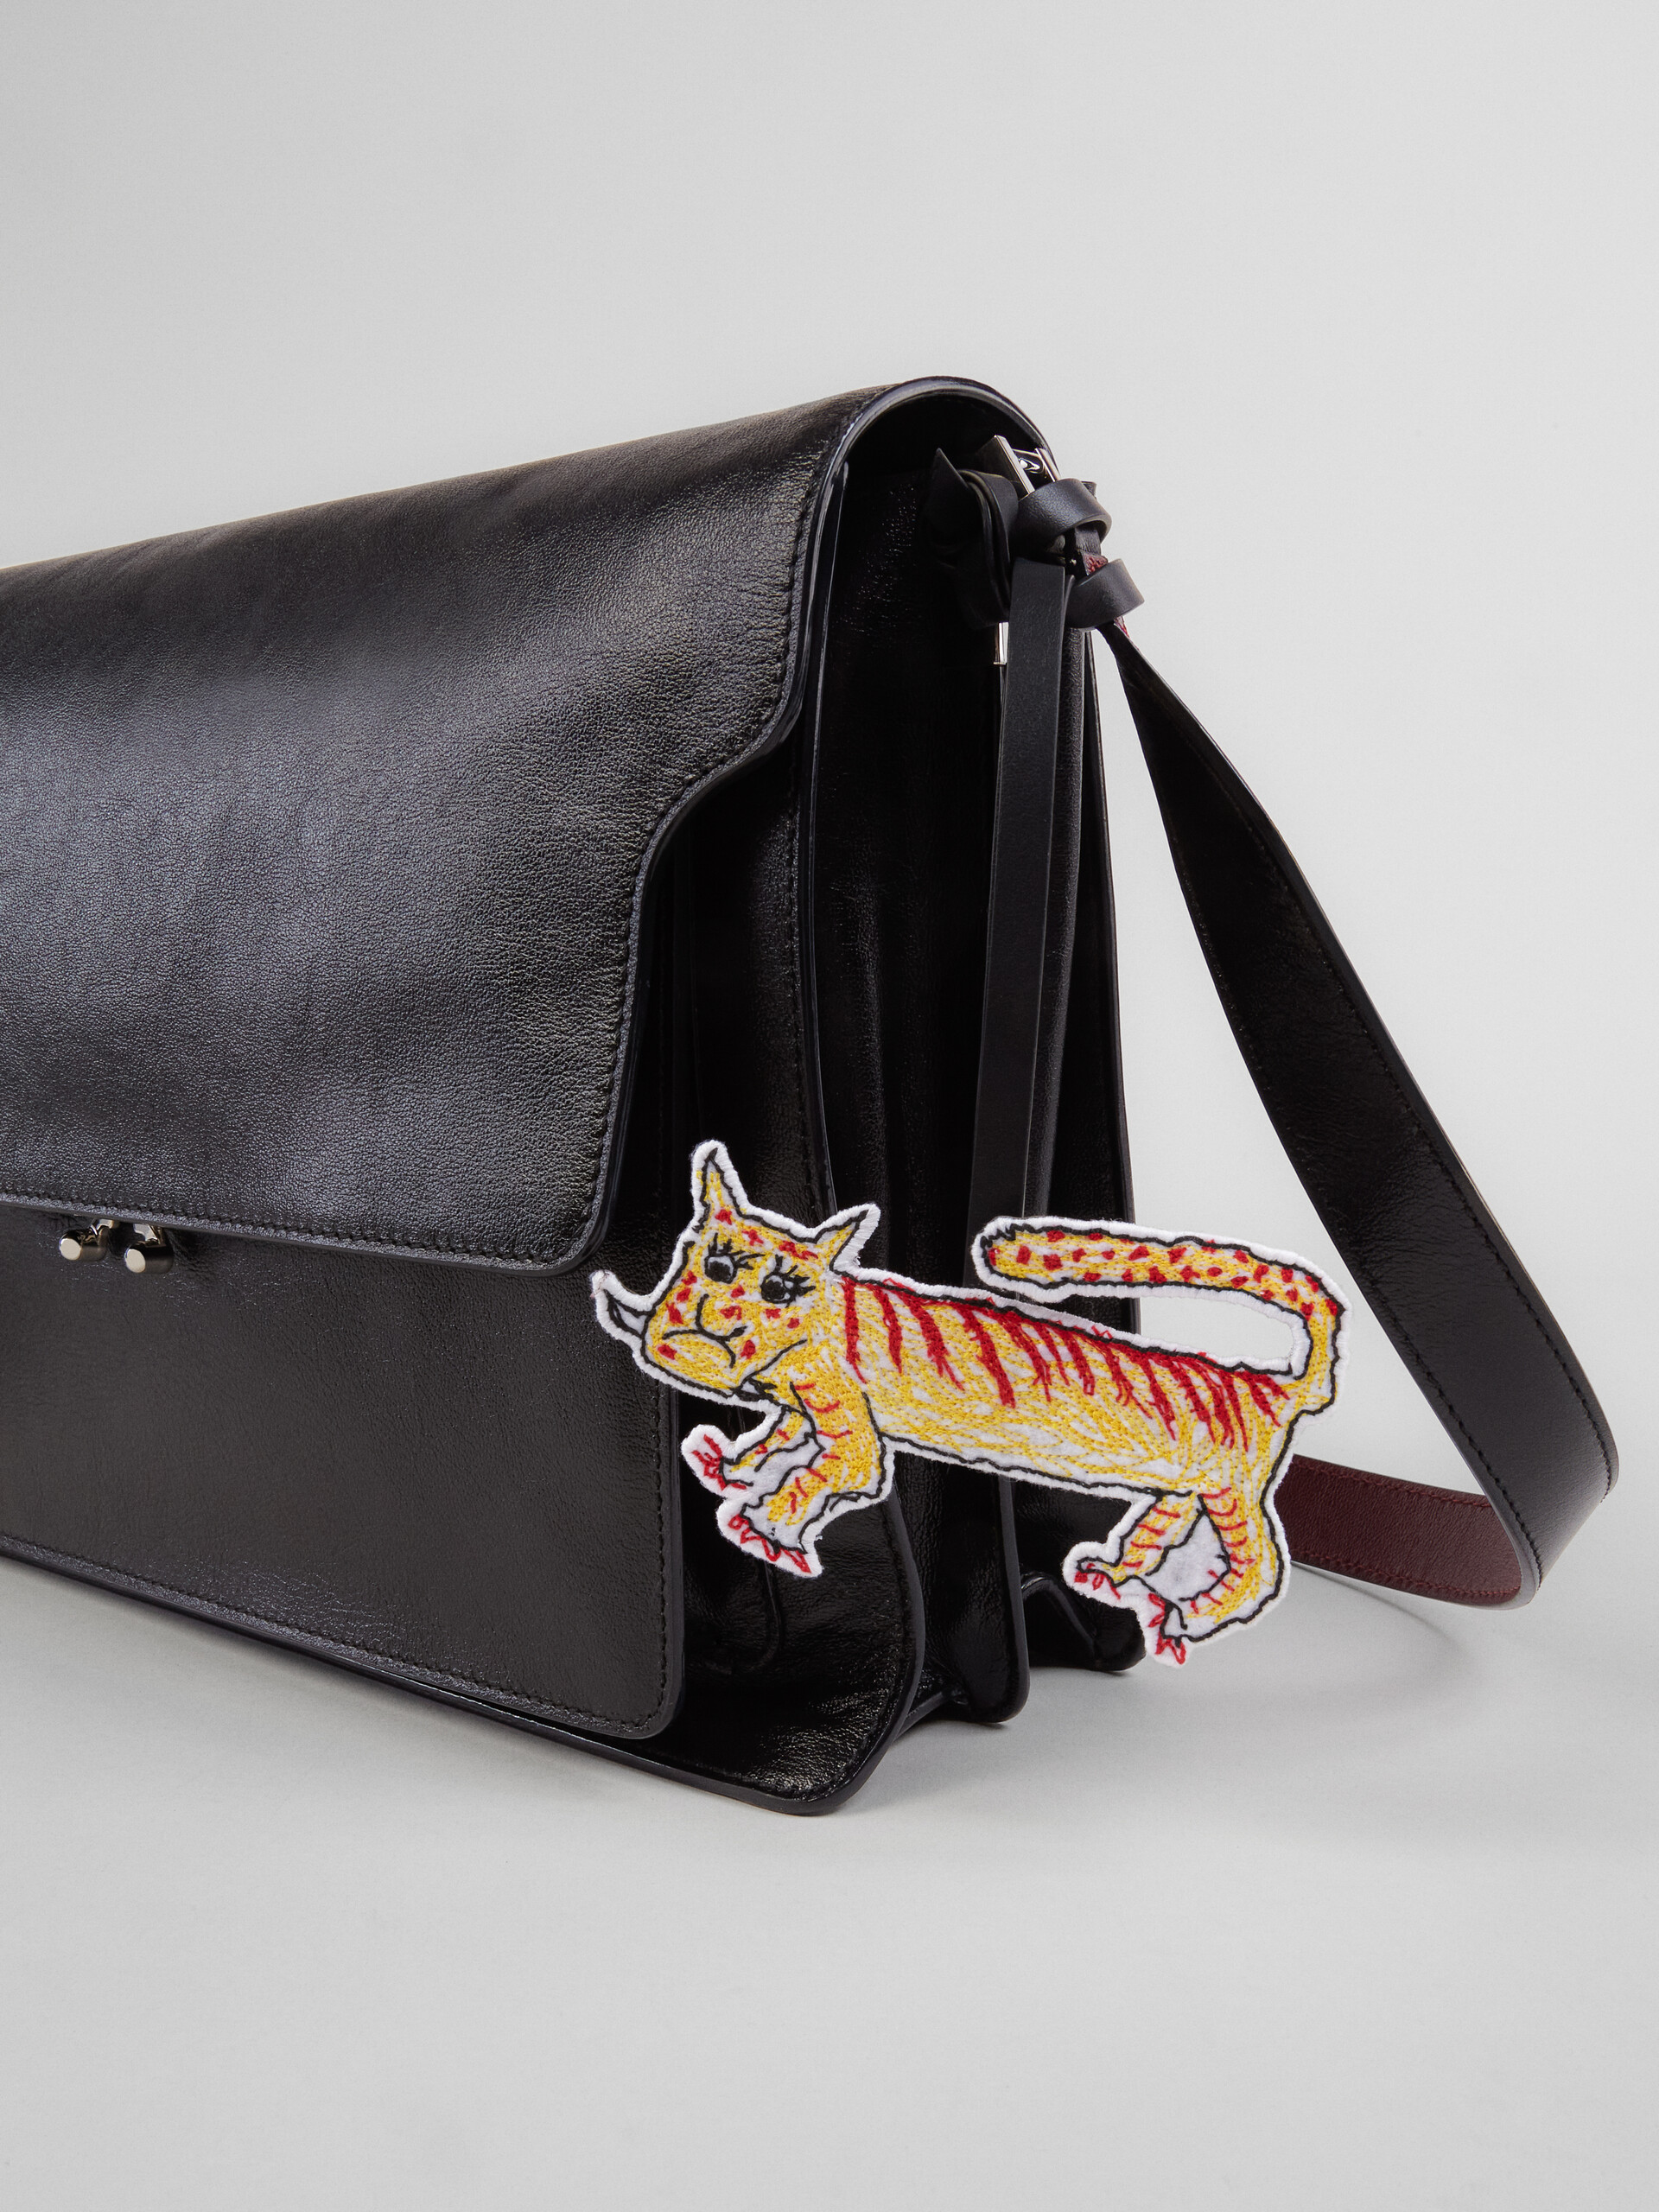 TRUNK SOFT bag in black leather and naif tiger print - Shoulder Bags - Image 4